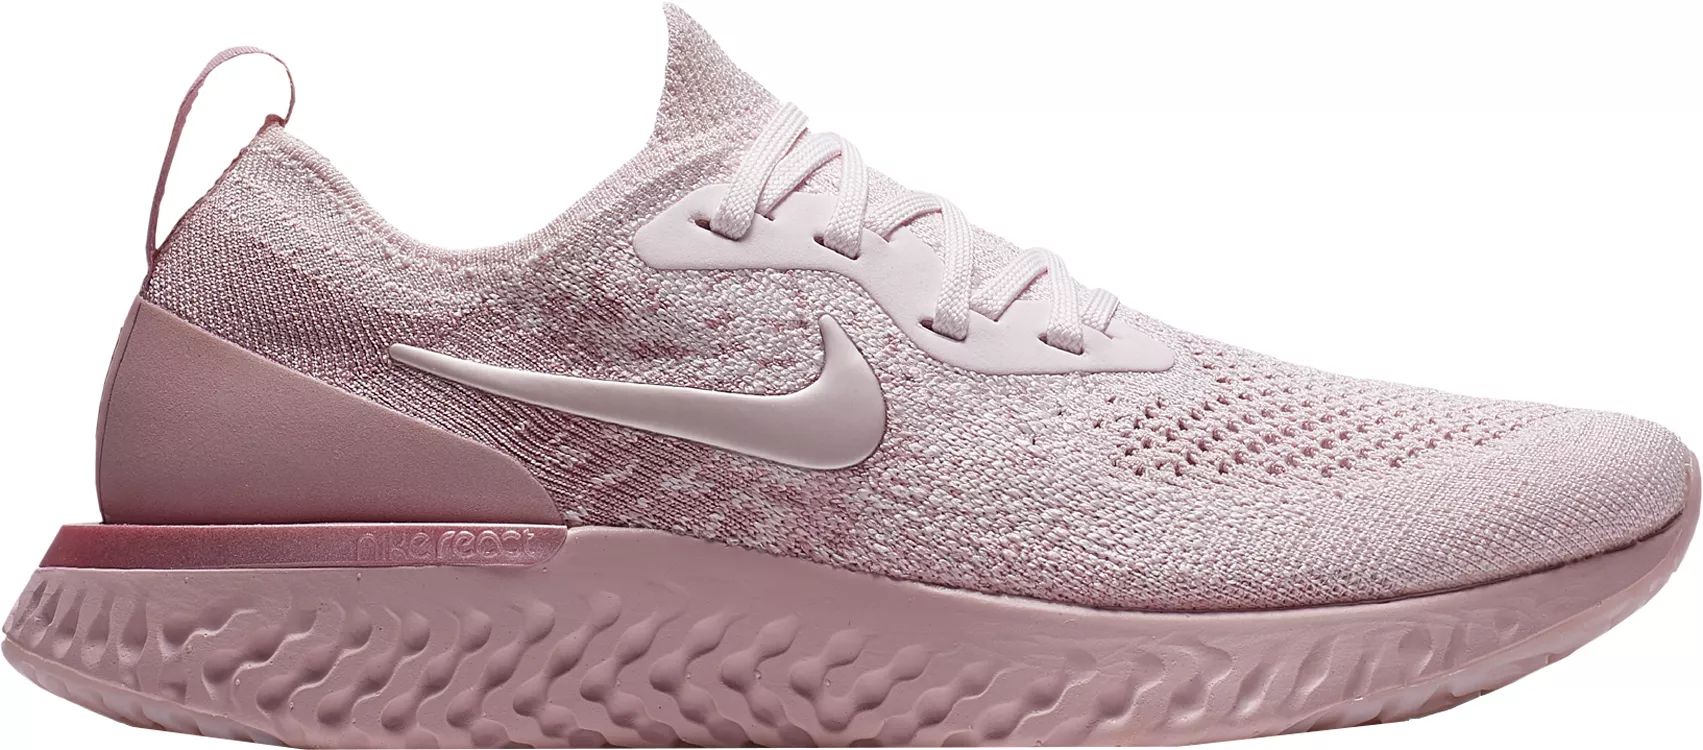 Nike Women's Epic React Flyknit Running Shoes, Size: 6.0, Pink | Dick's Sporting Goods